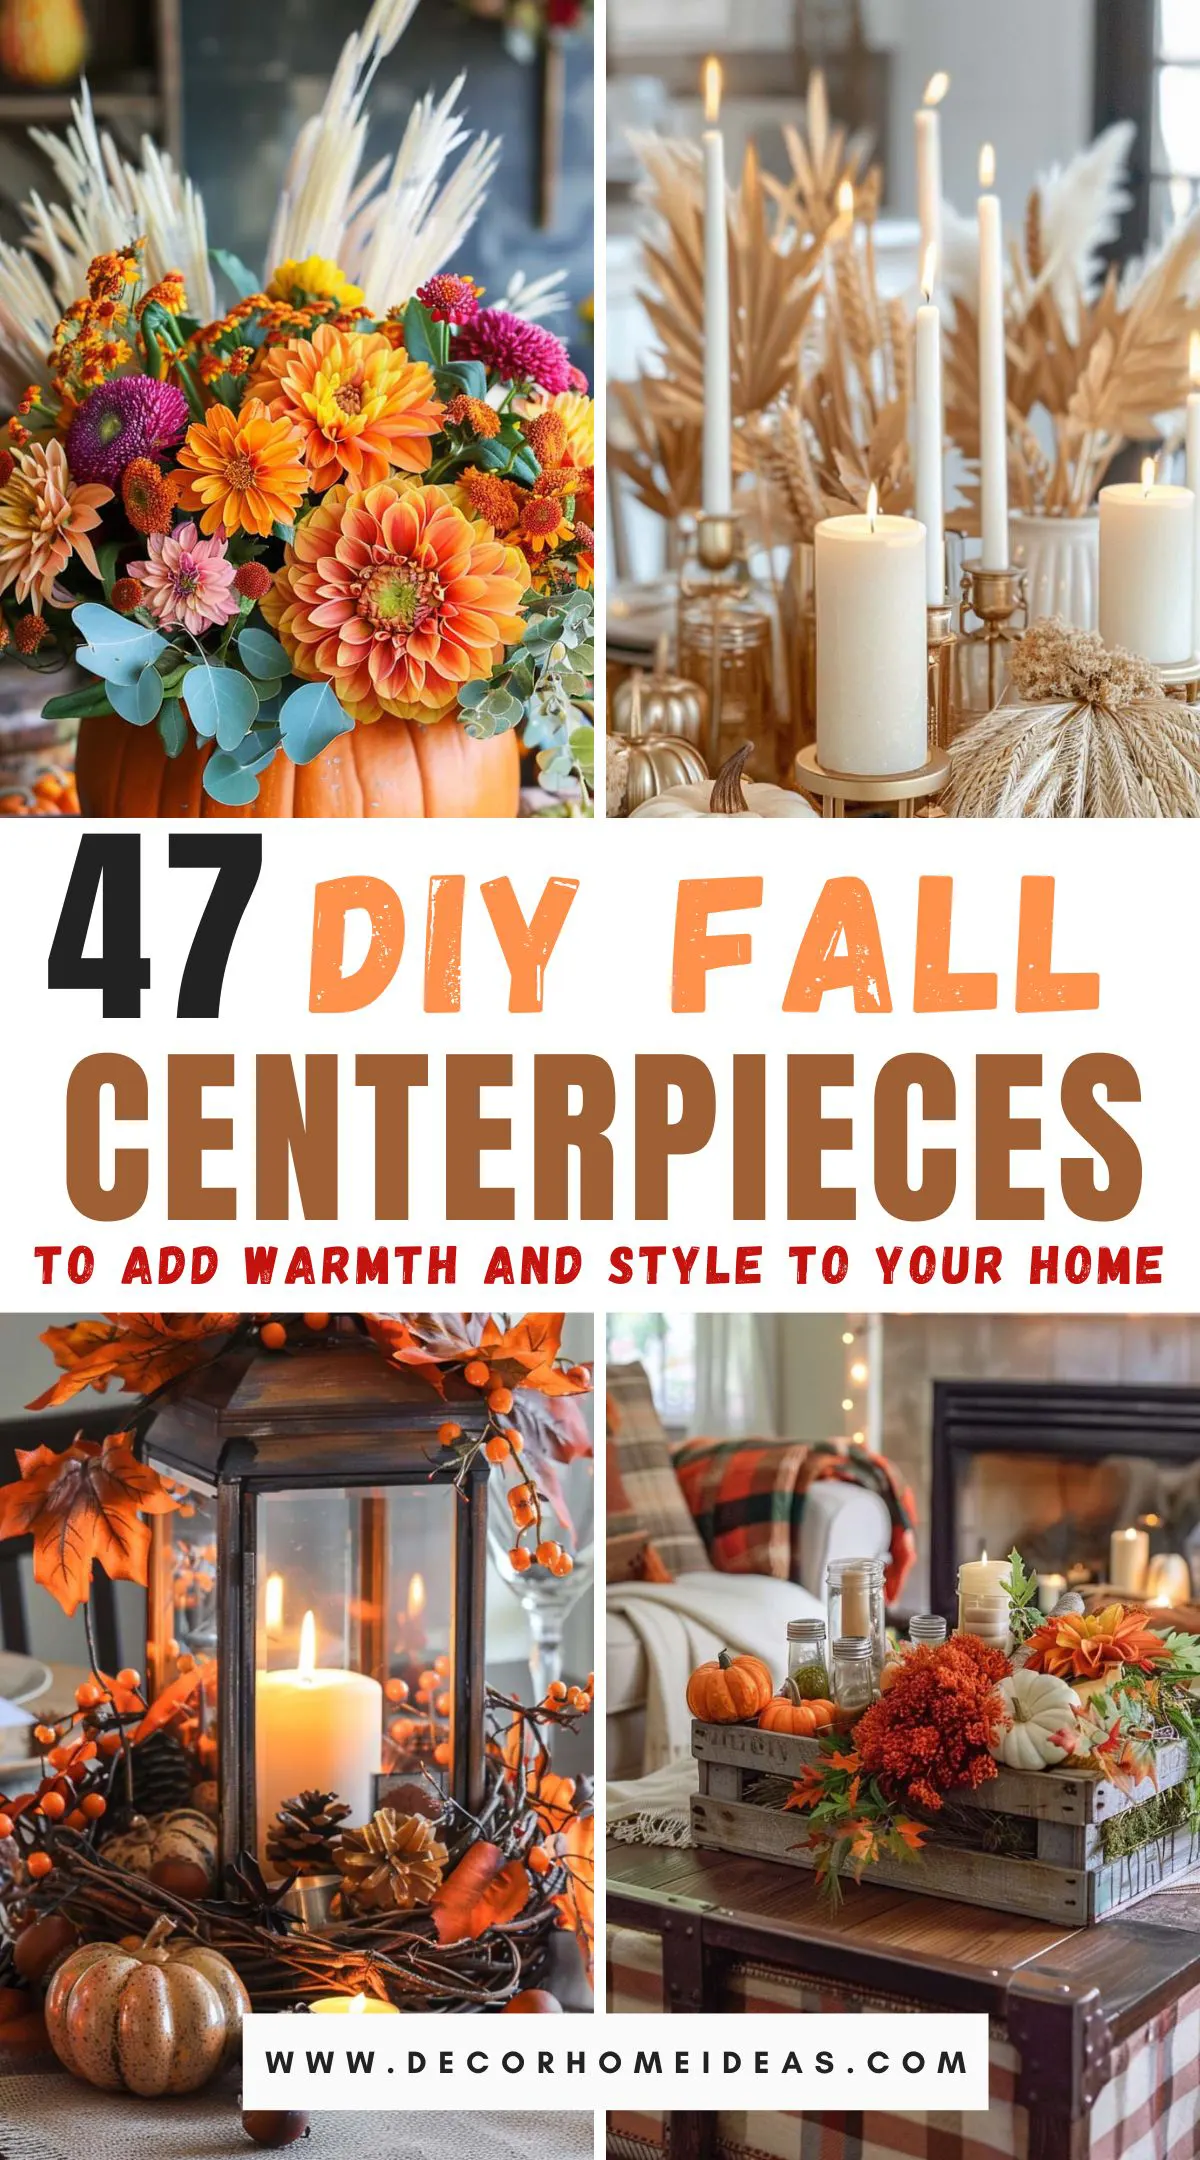 Add warmth and style to your home this autumn with 42 spectacular DIY fall centerpieces. Discover creative projects using pumpkins, candles, foliage, and more to bring the cozy charm of the season to your table. Dive into our ideas to craft beautiful, budget-friendly centerpieces that will impress your guests and elevate your fall decor.